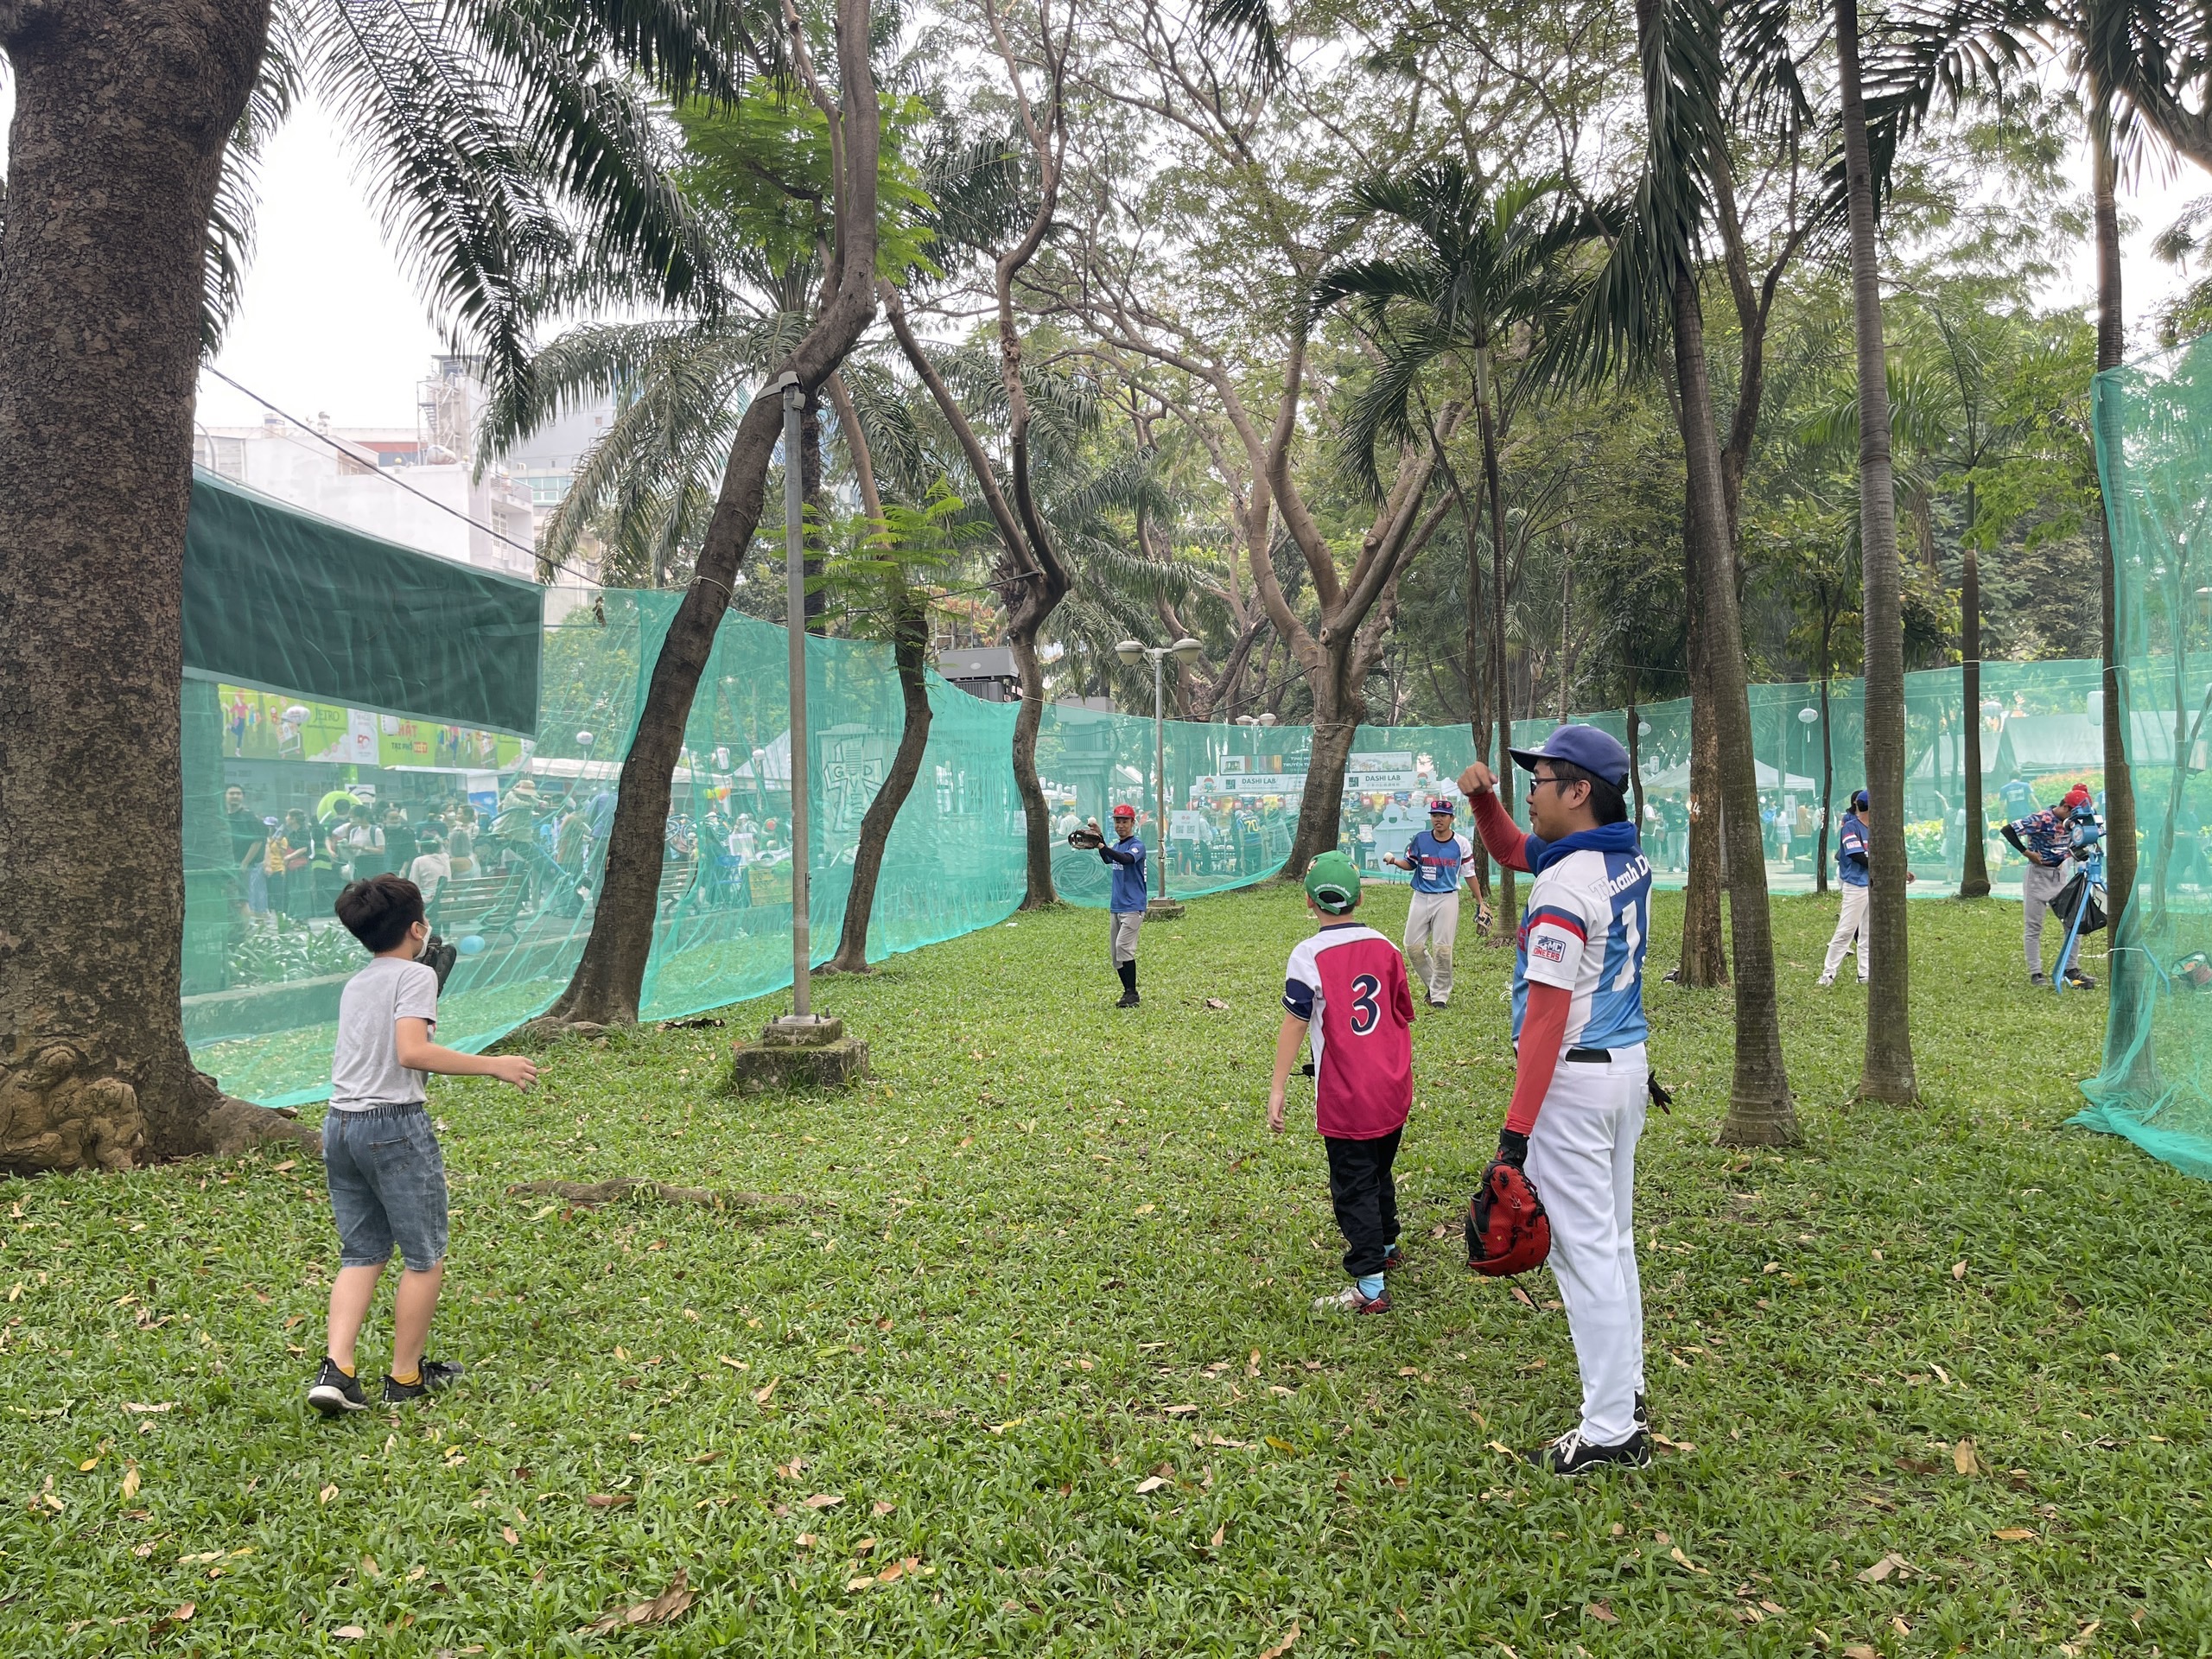 Children learn to play baseball at the Japan Vietnam Festival in Ho Chi Minh City on February 25, 2023. Photo: Dong Nguyen / Tuoi Tre News